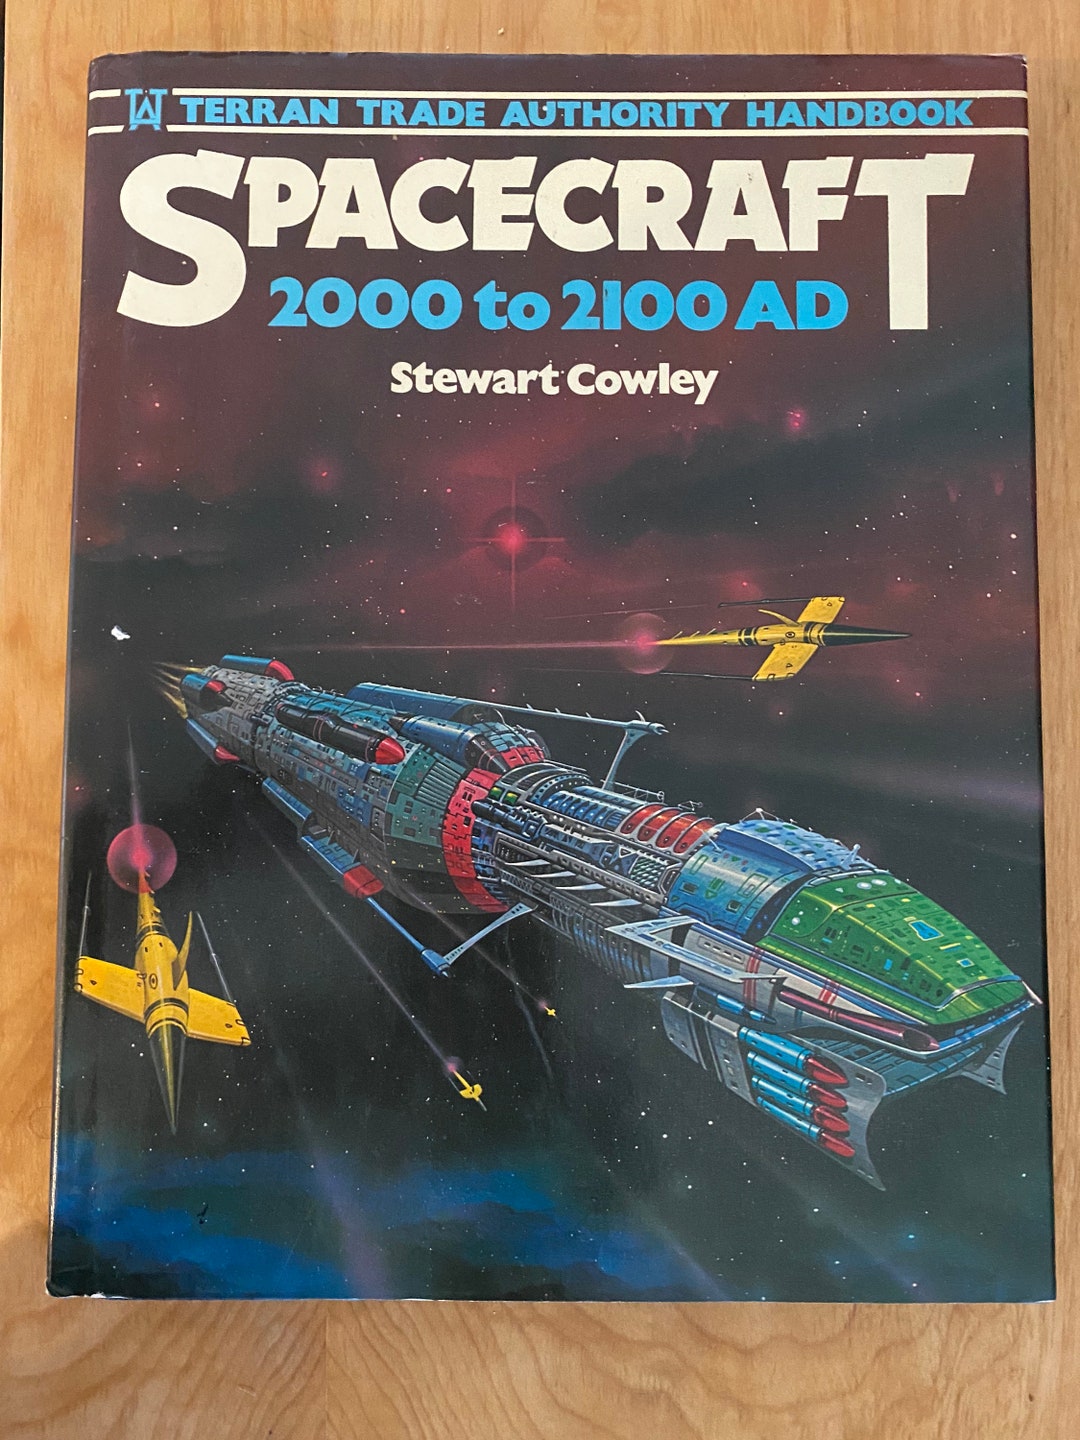 SPACECRAFT 2000 TO 2100 AD Terran Trade Authority by Stewart